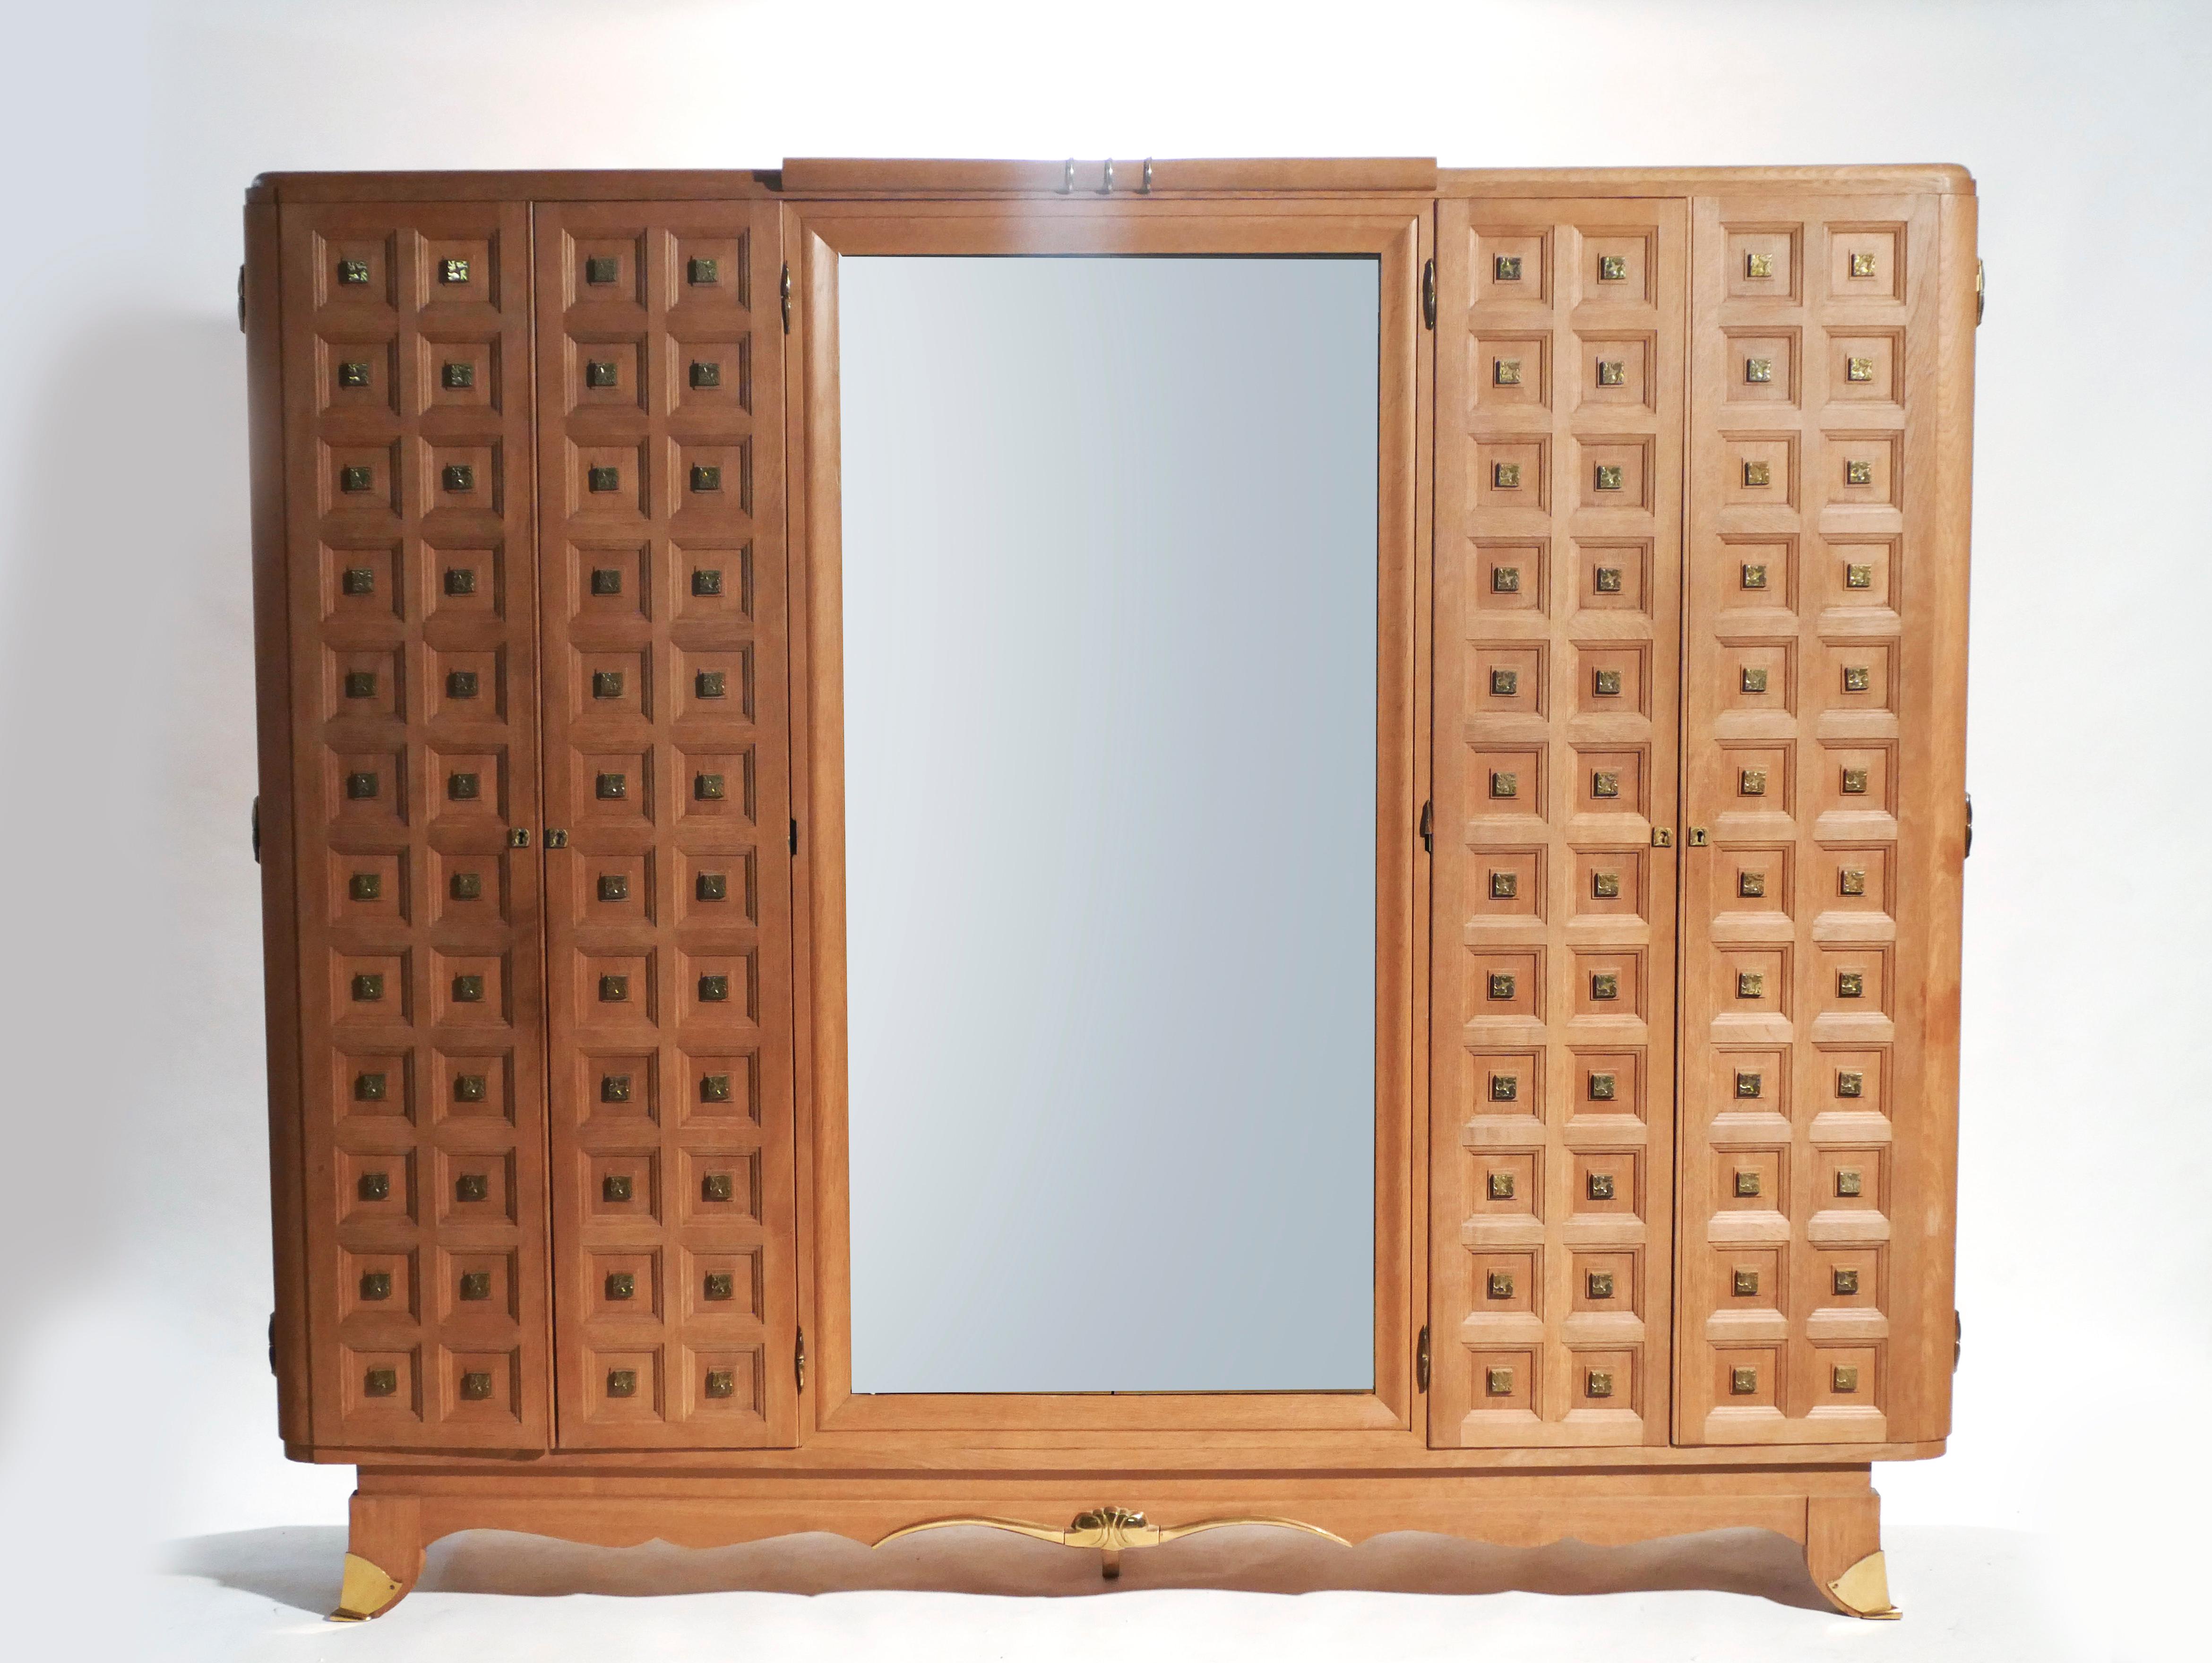 Spacious shelves and large mirror make this large oak wardrobe suitable as a bedroom armoire, or as a multipurpose and decorative cabinet in an entryway or living room. The cabin doors and feet are adorned with quality brass, and the inner shelves